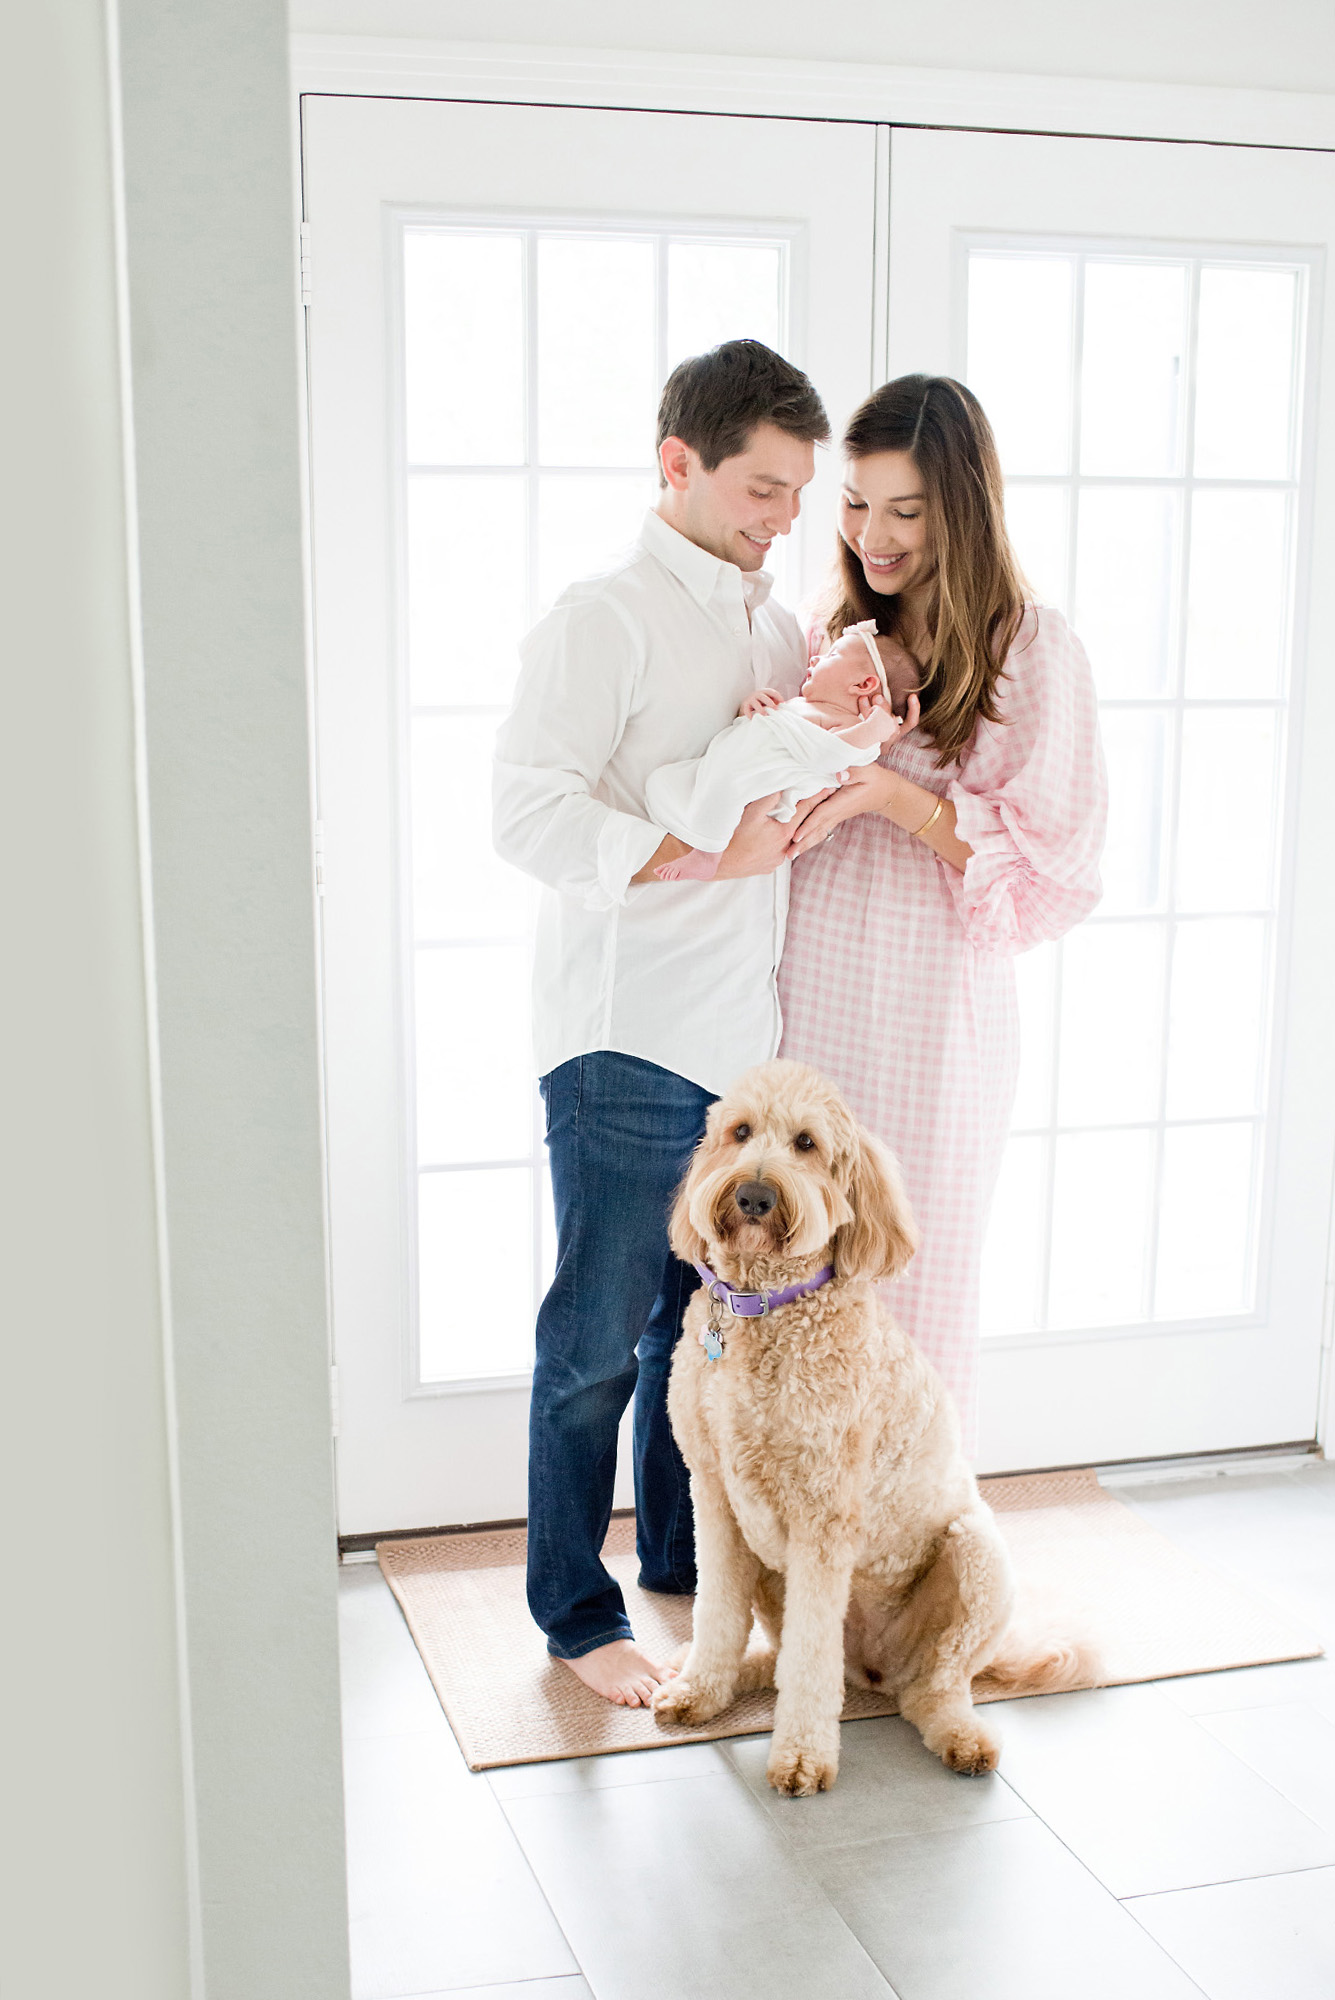 Mom and dad with newborn baby and dog